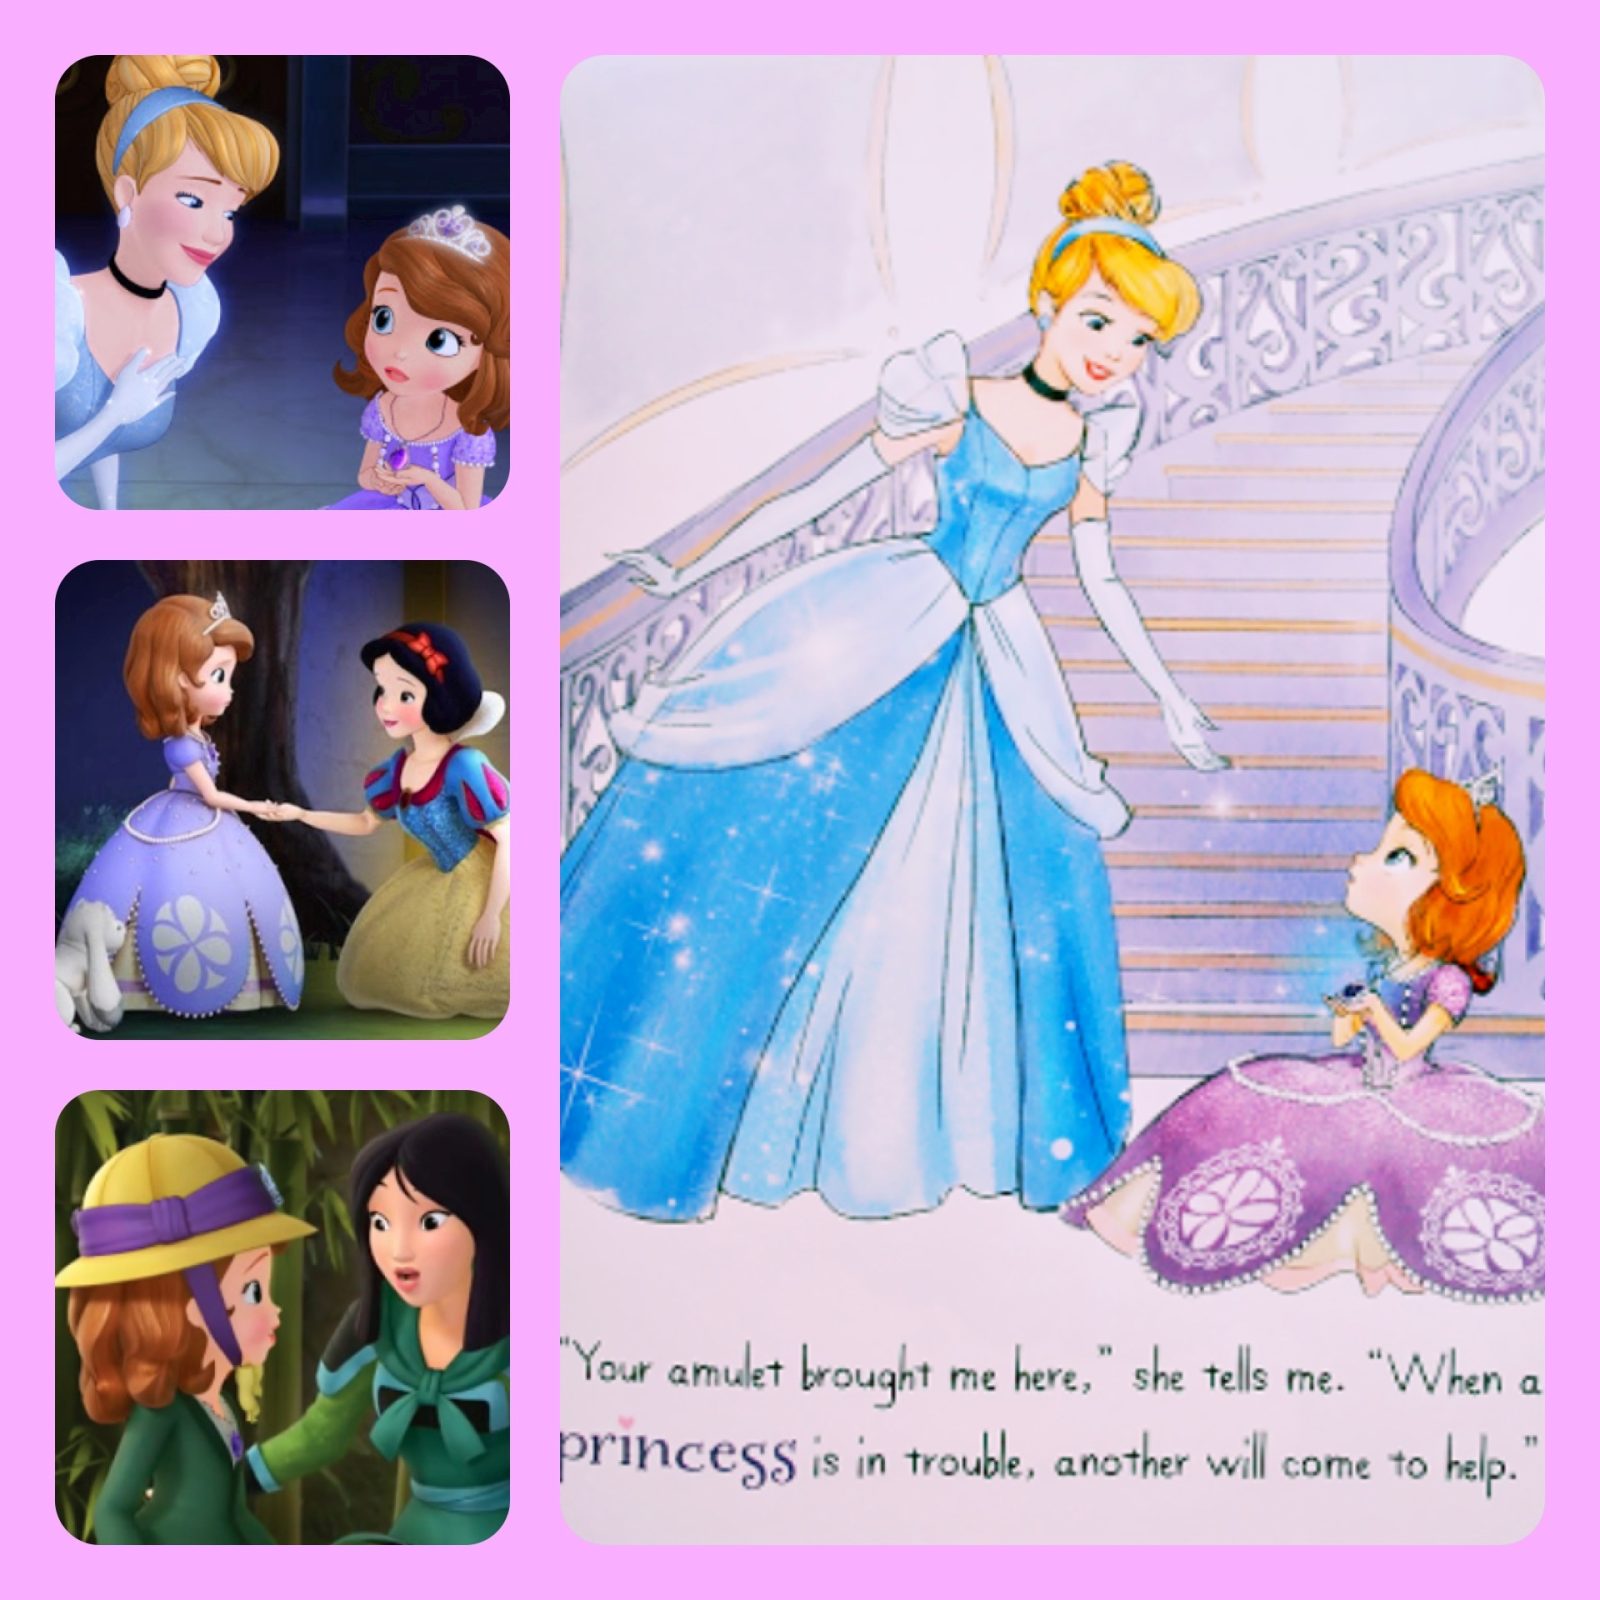 Disney Channel's Sofia The First Review - Lessons from the Disney Princesses